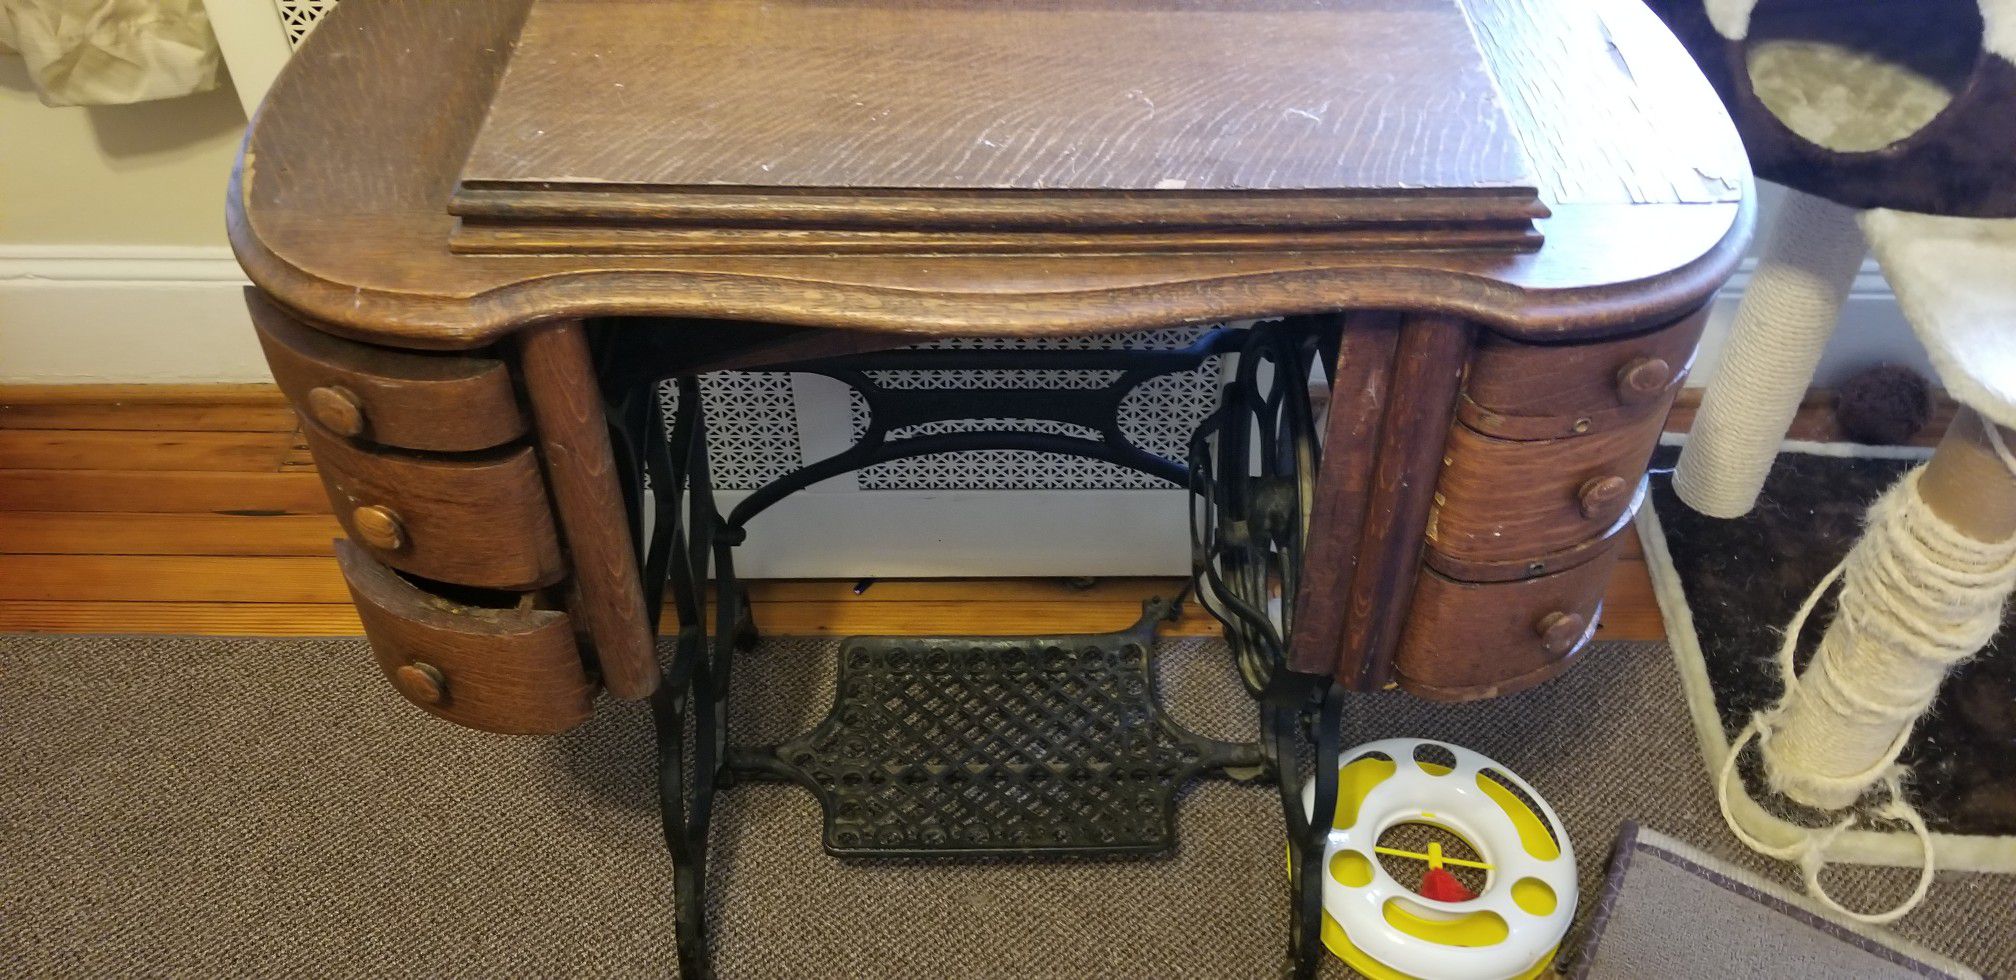 Antique sowing table